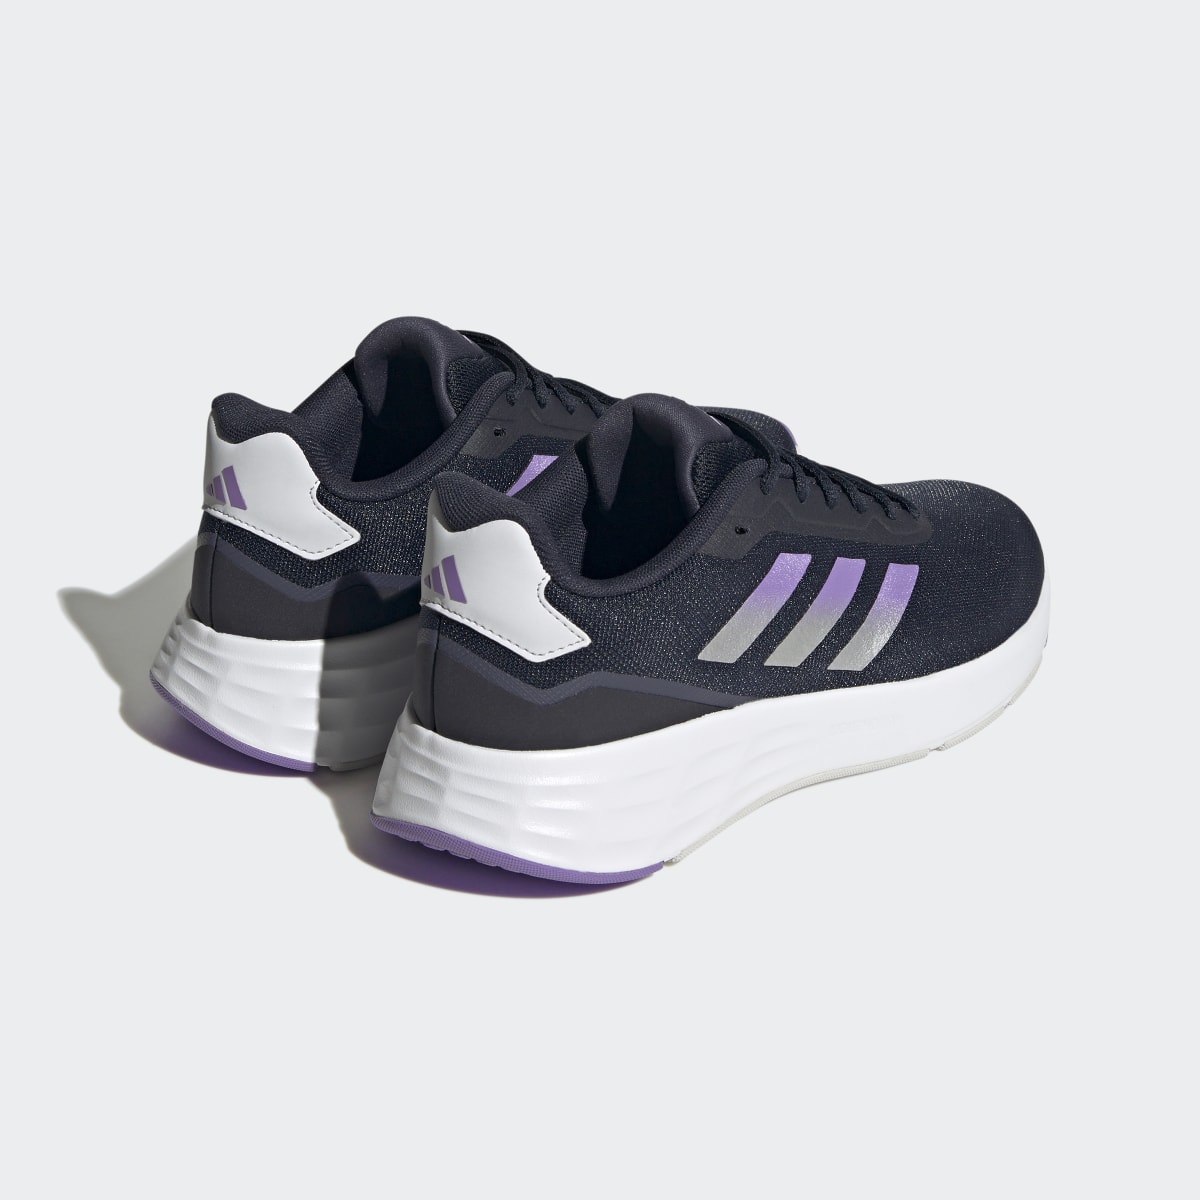 Adidas Start Your Run Shoes. 6